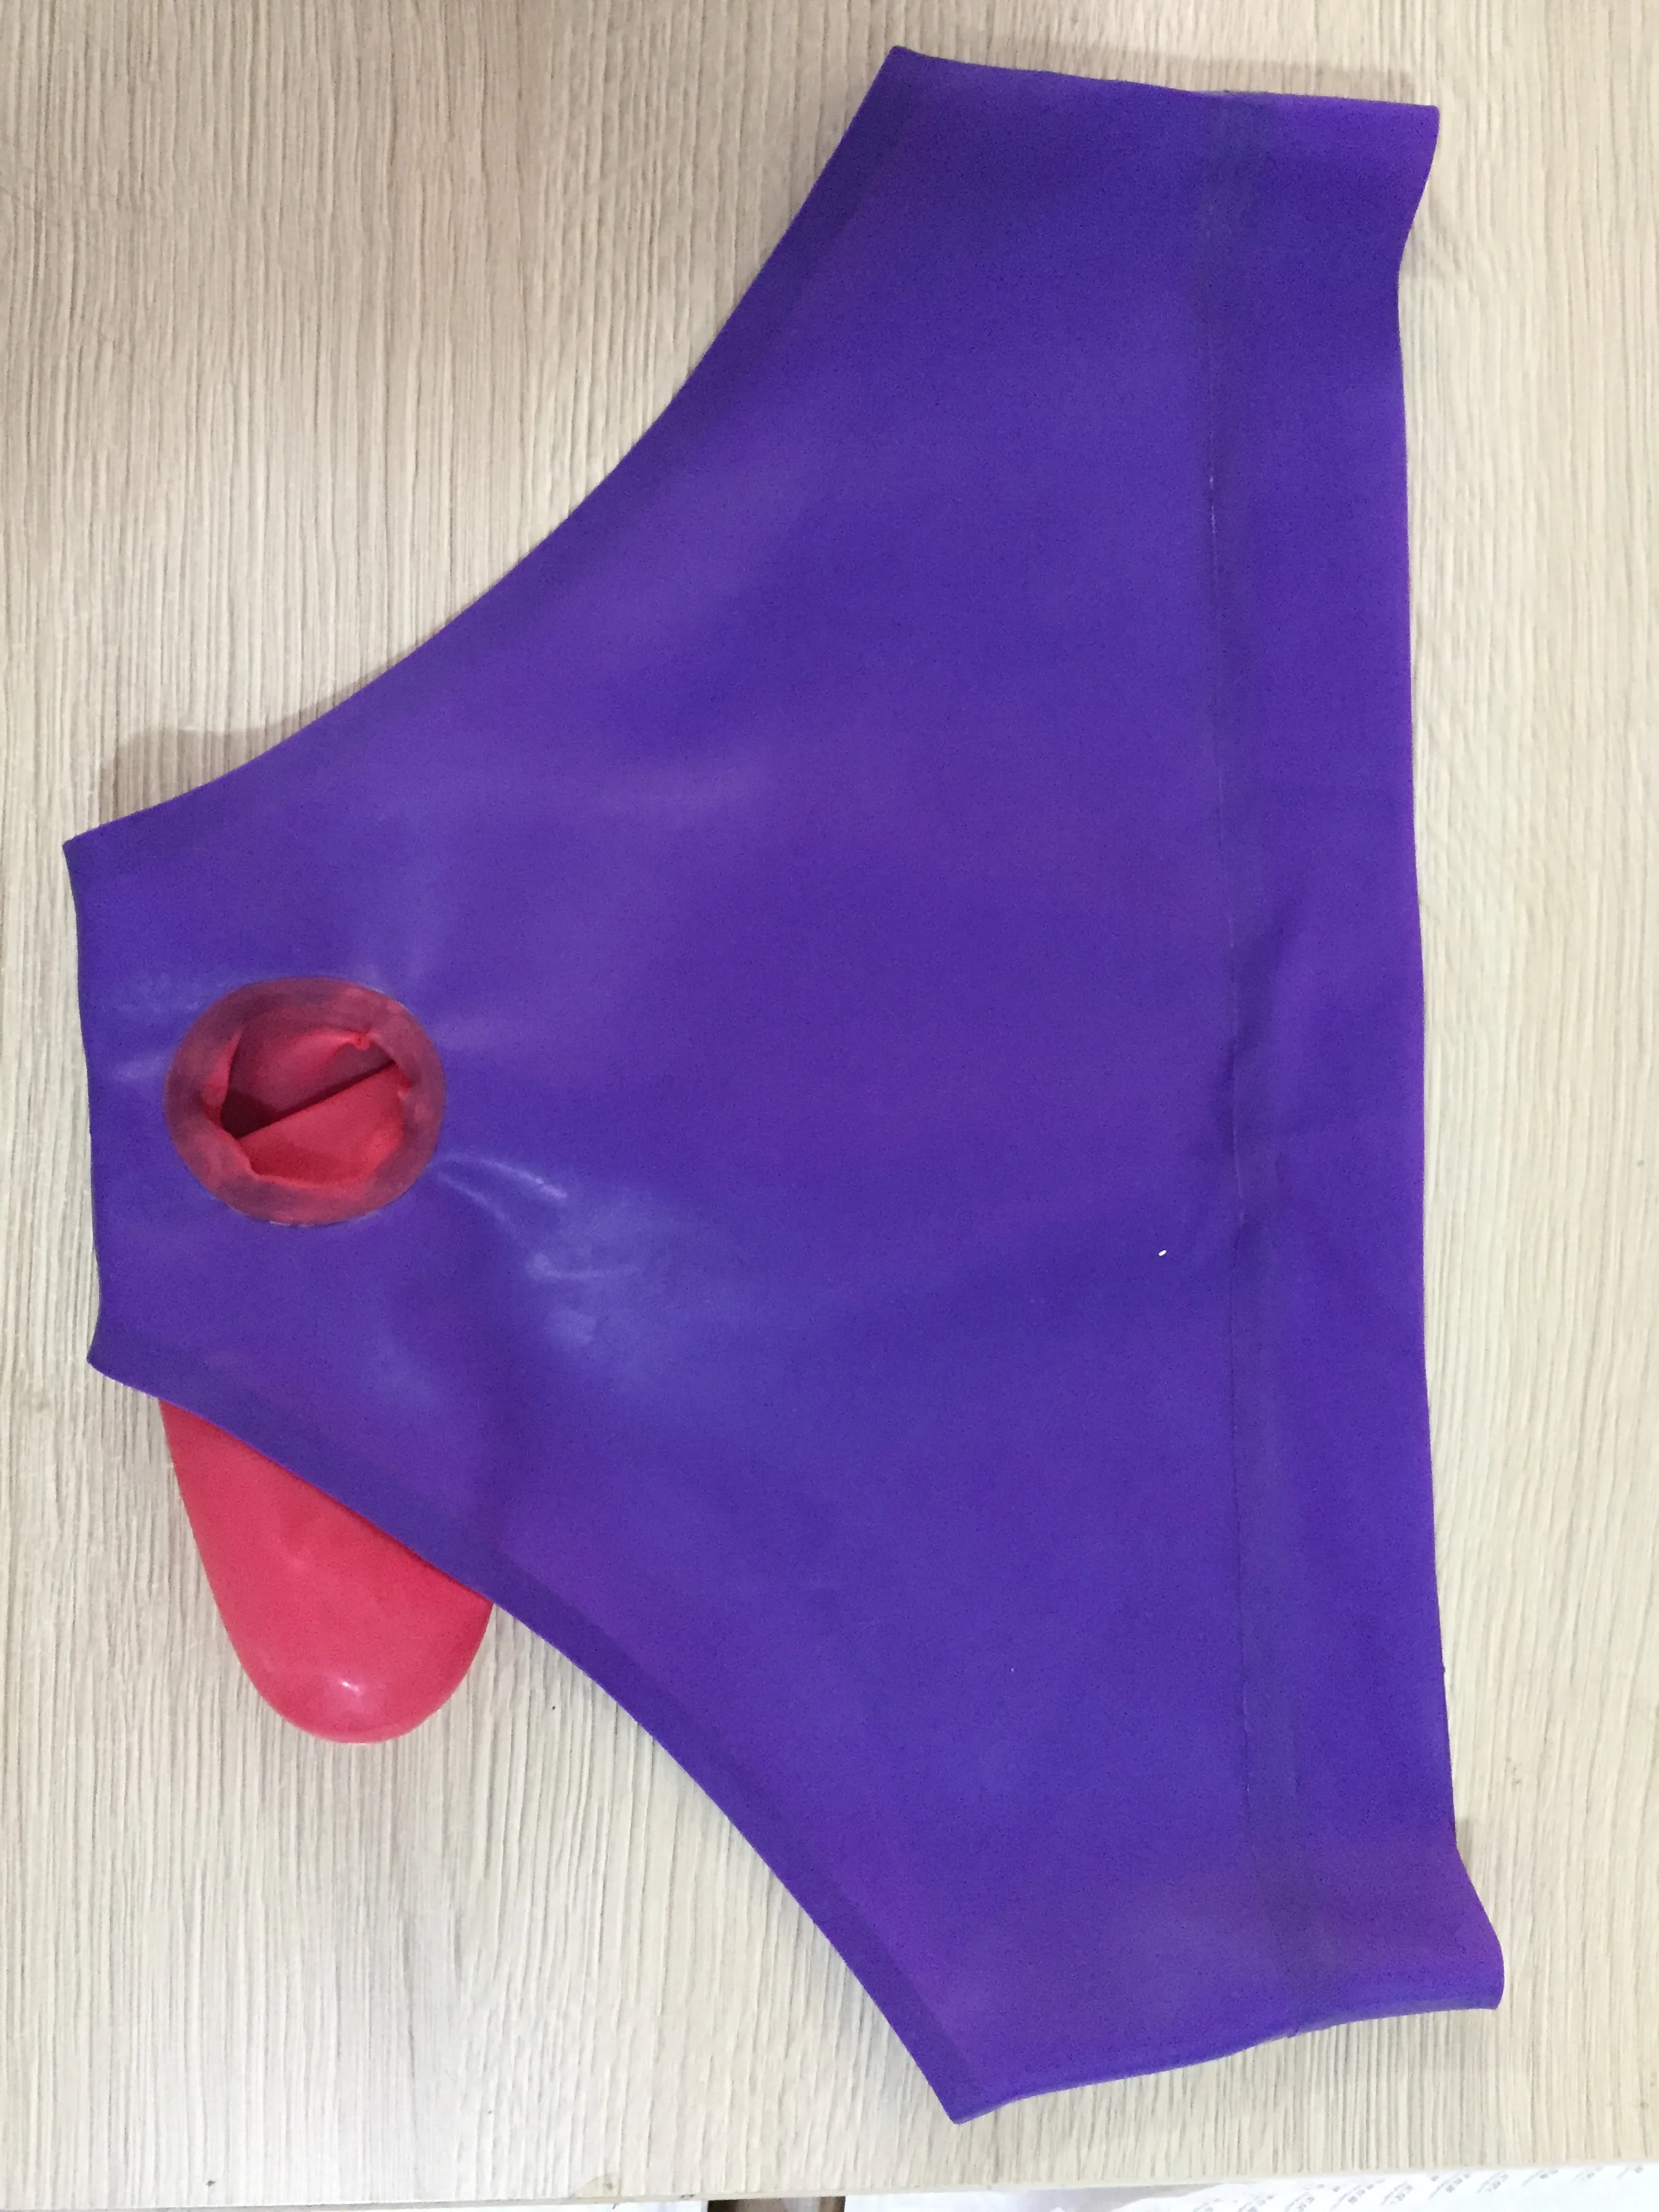 Briefs Underpants Natural Latex With Penis Condom ANUS Customized